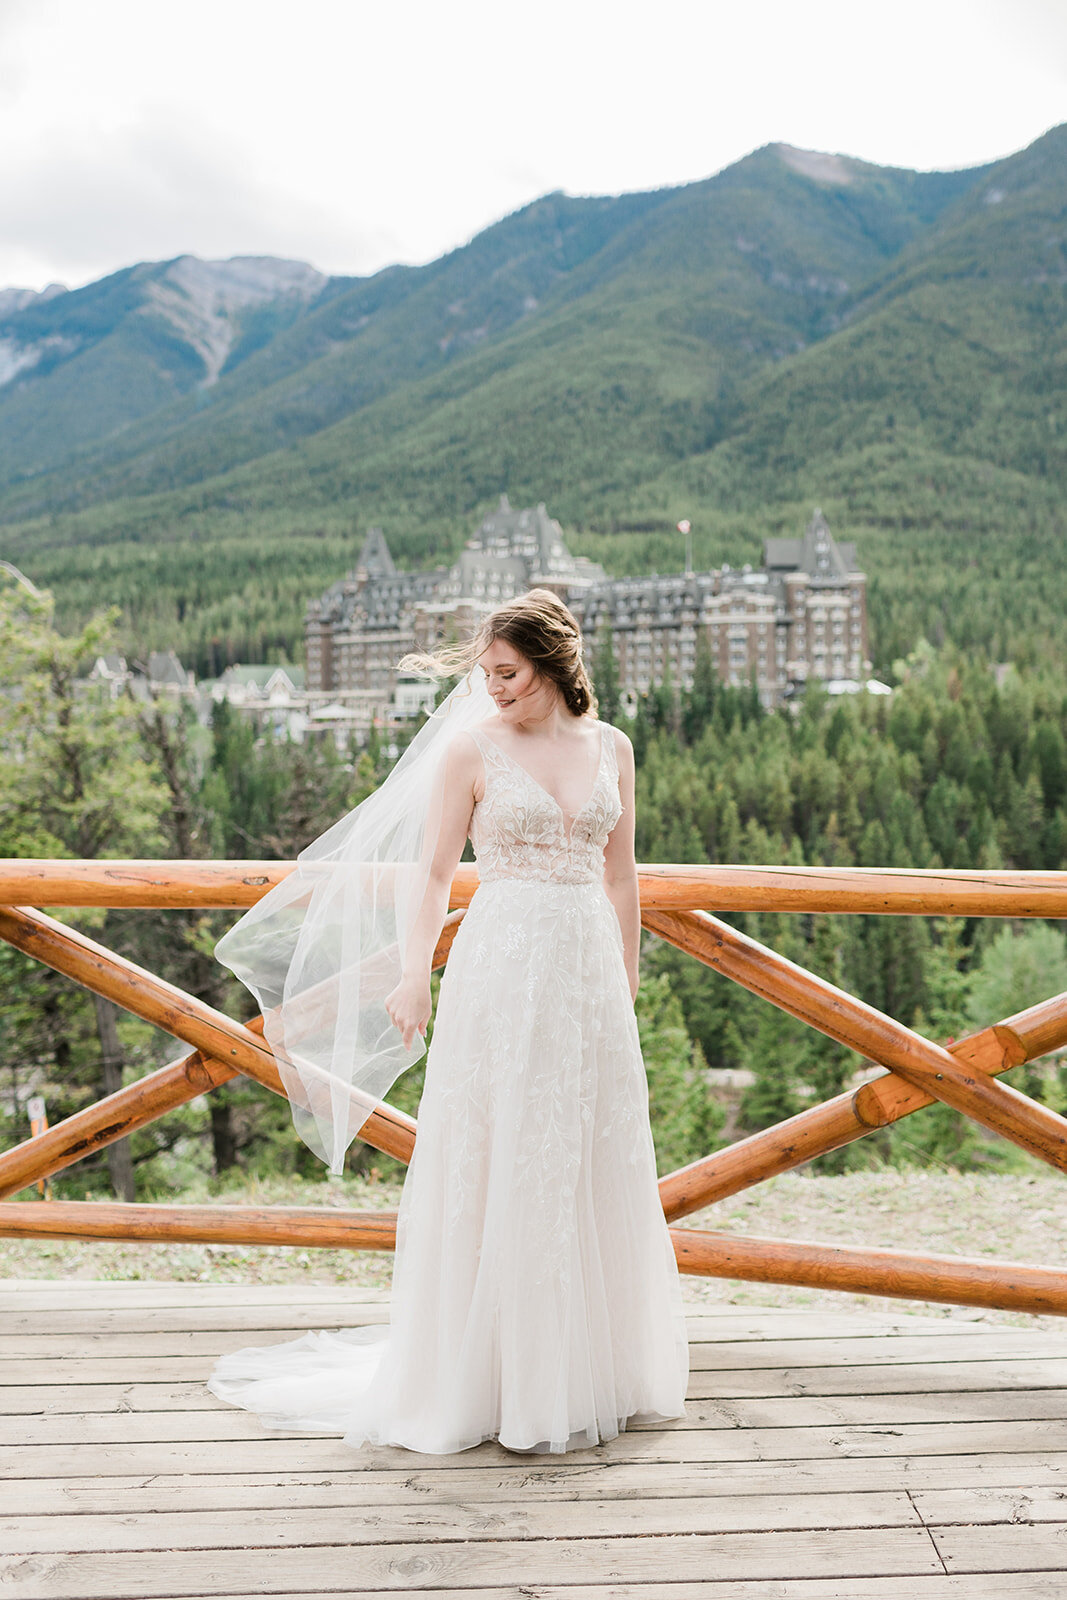 Bridal portrait in front of rocky mountains